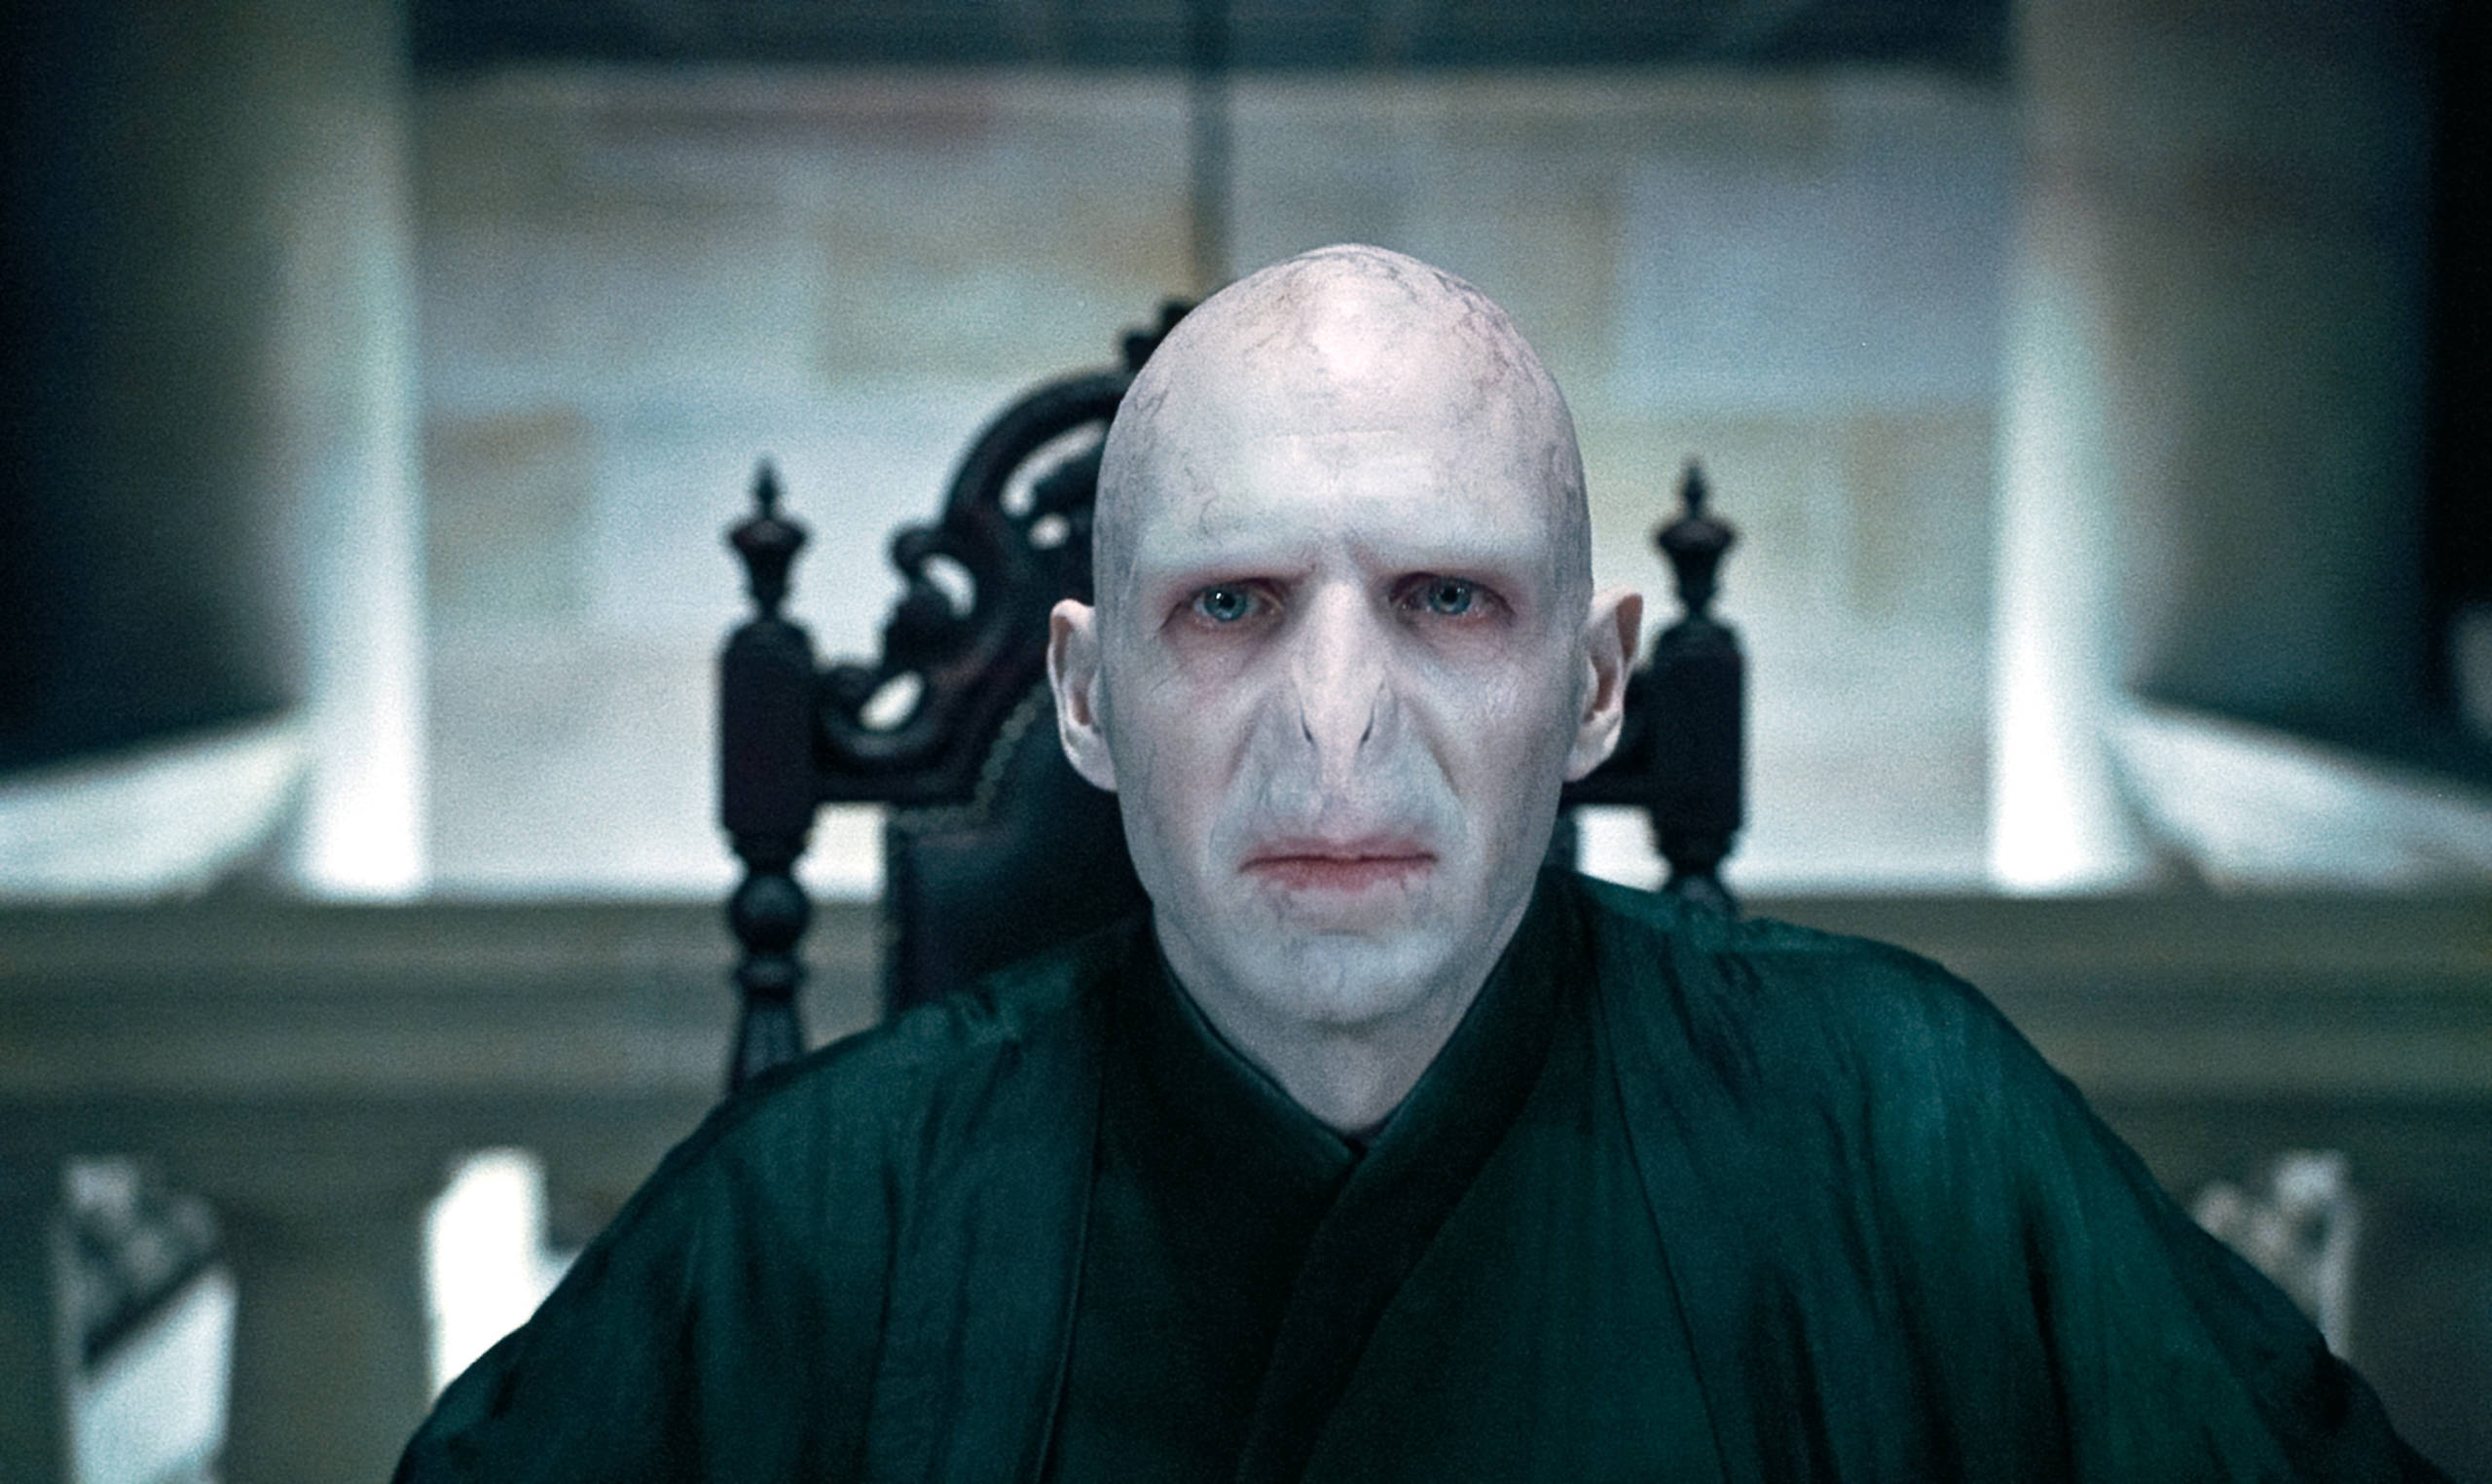 Who is the most ruthless villain in Harry Potter?